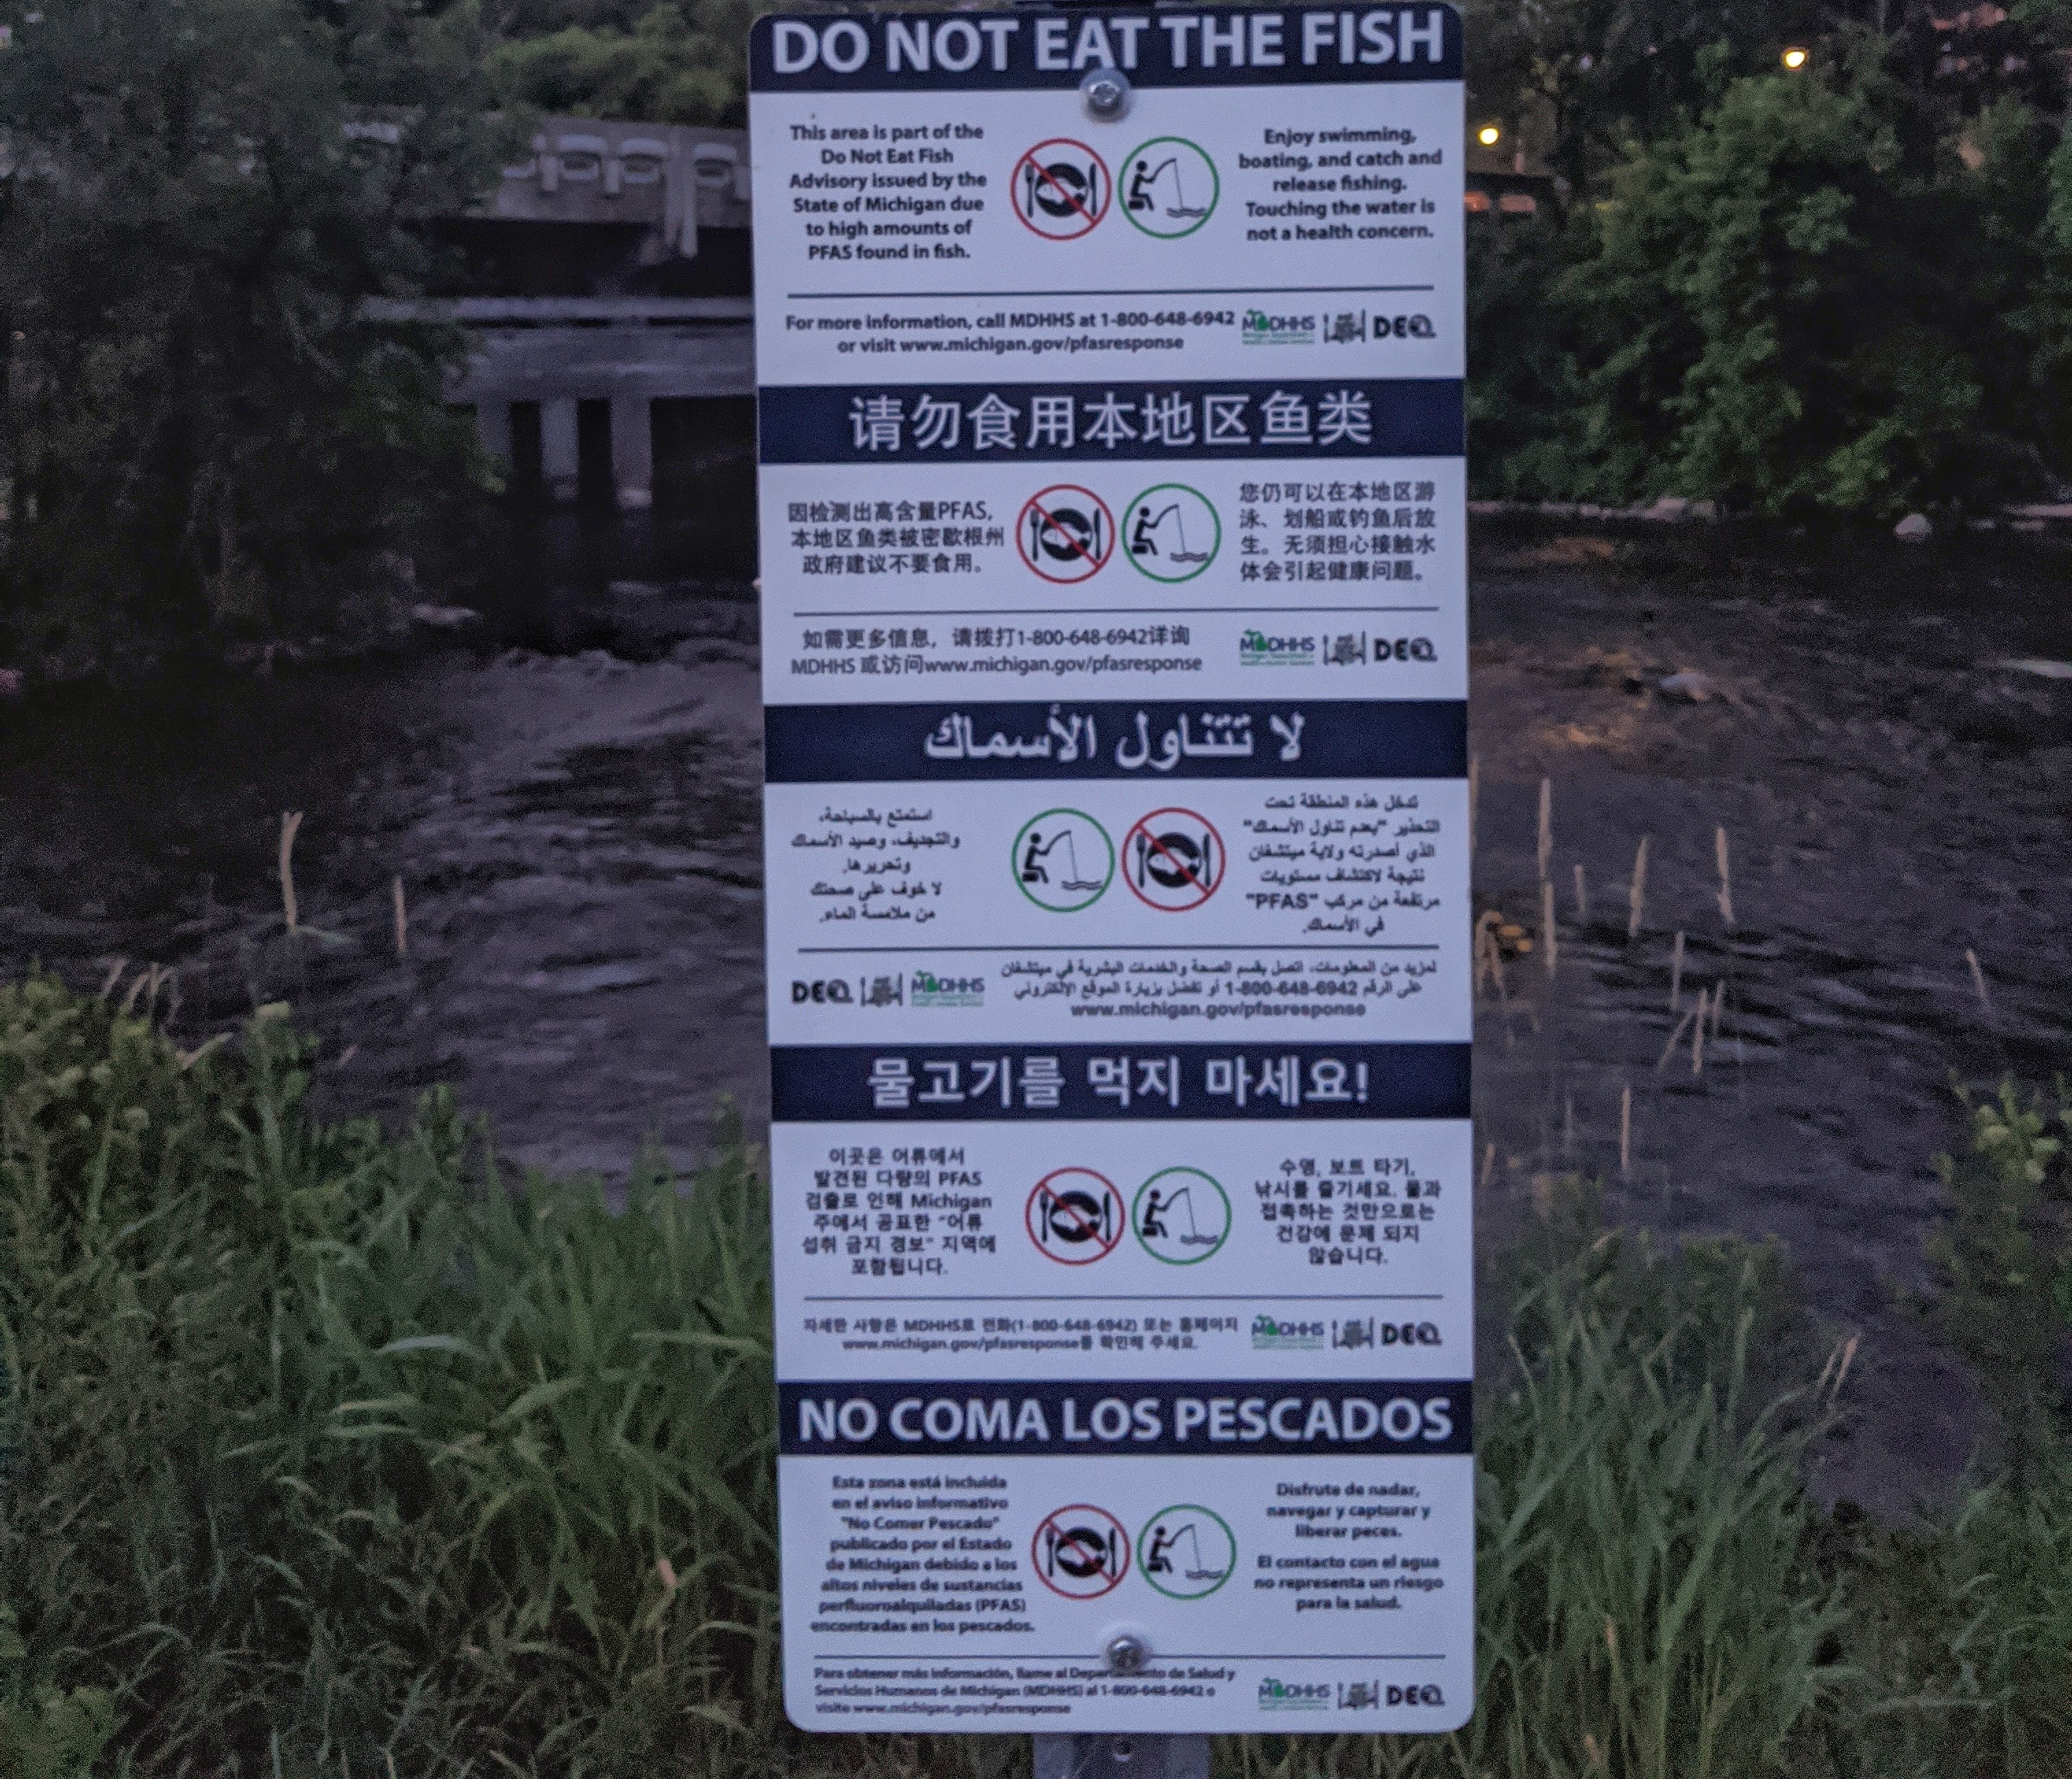 Warnings "Do Not Eat The Fish" due to PFAS in multiple languages